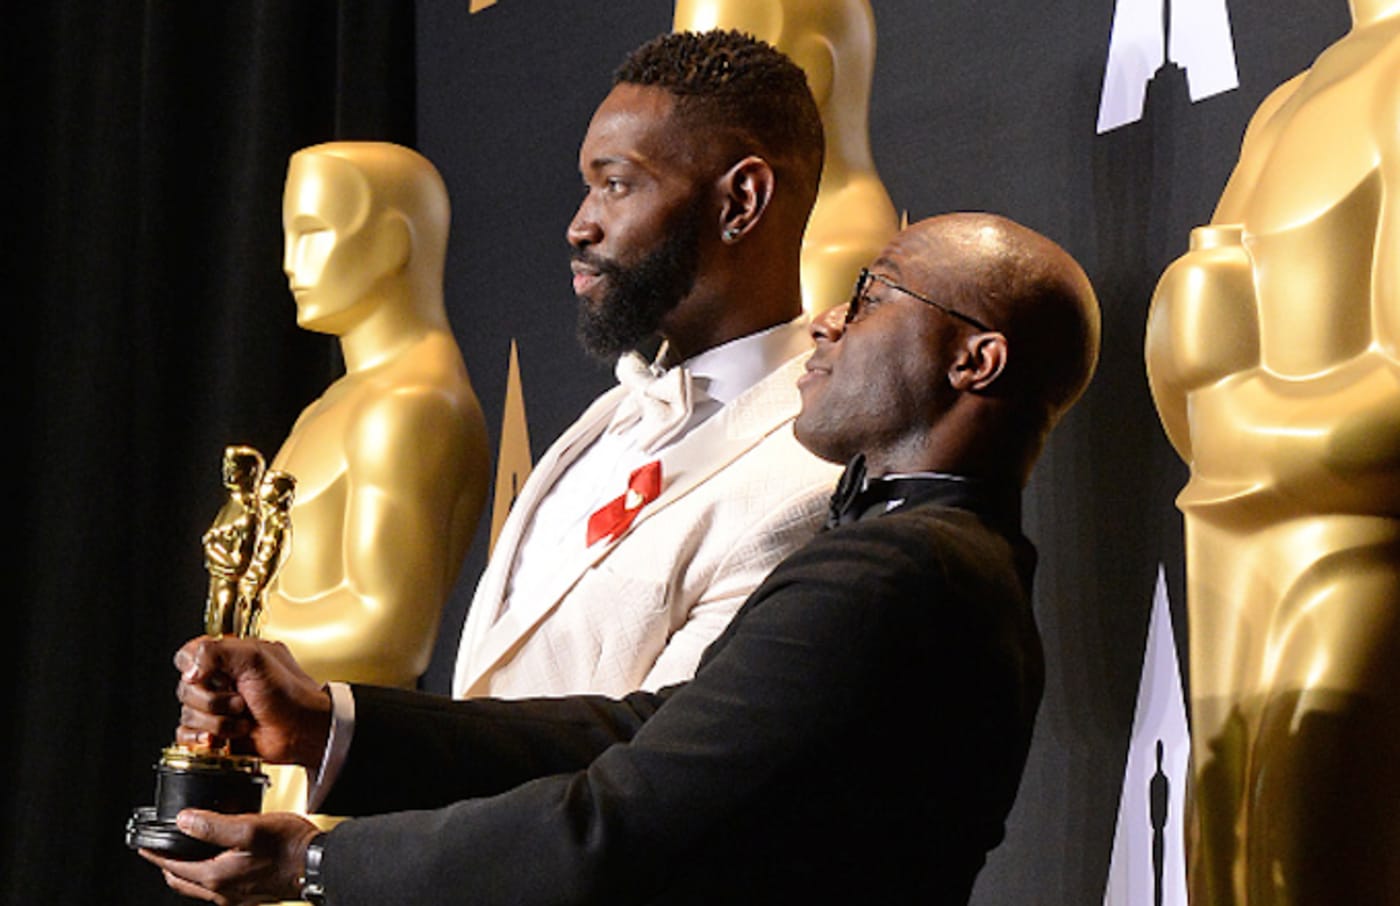 'Moonlight' director Barry Jenkins (R) and writer Tarell Alvin McCraney pose with the Oscar